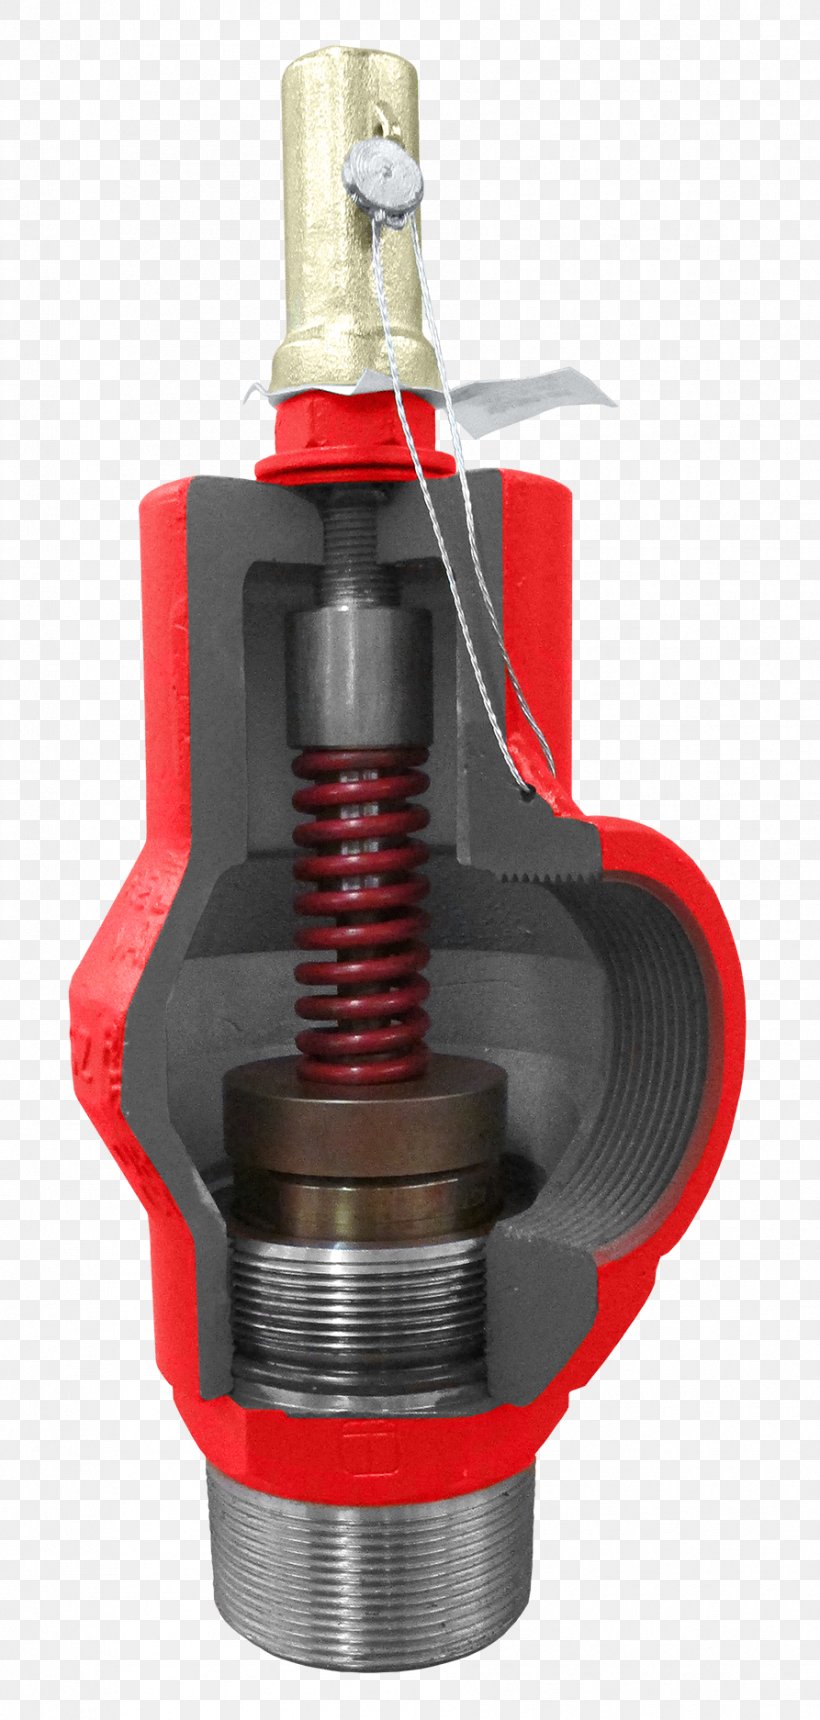 Relief Valve Pressure Vessel Energy Rupture Disc, PNG, 893x1874px, Relief Valve, Cylinder, Energy, Hardware, Industry Download Free